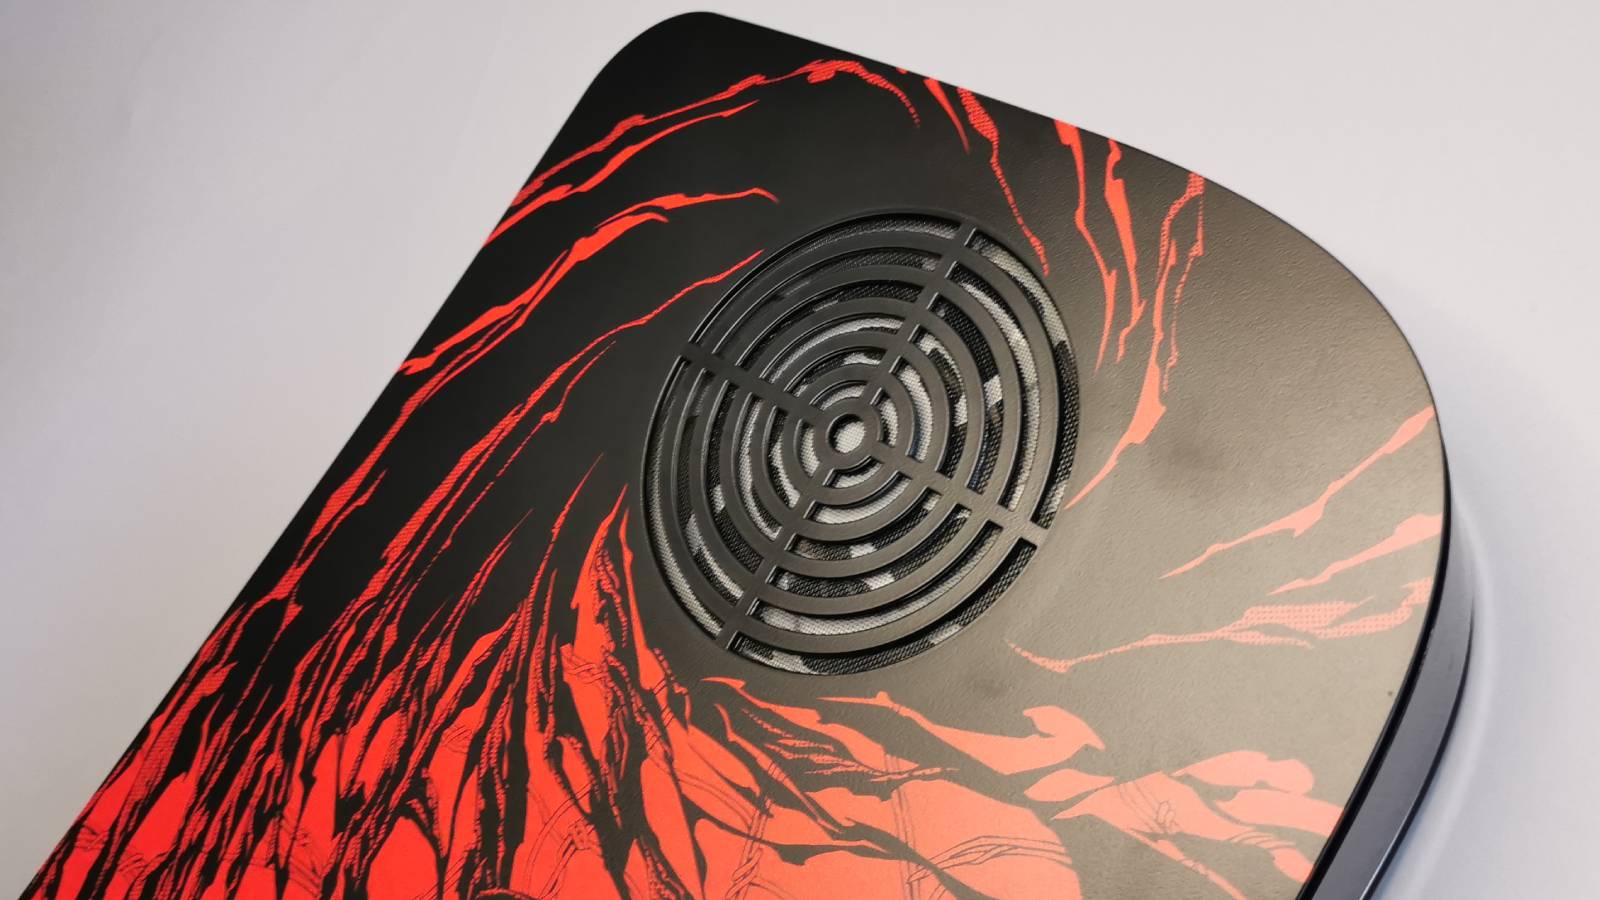 Image of the Dbrand PS5 Arachnoplates cover, against a gray wall background.